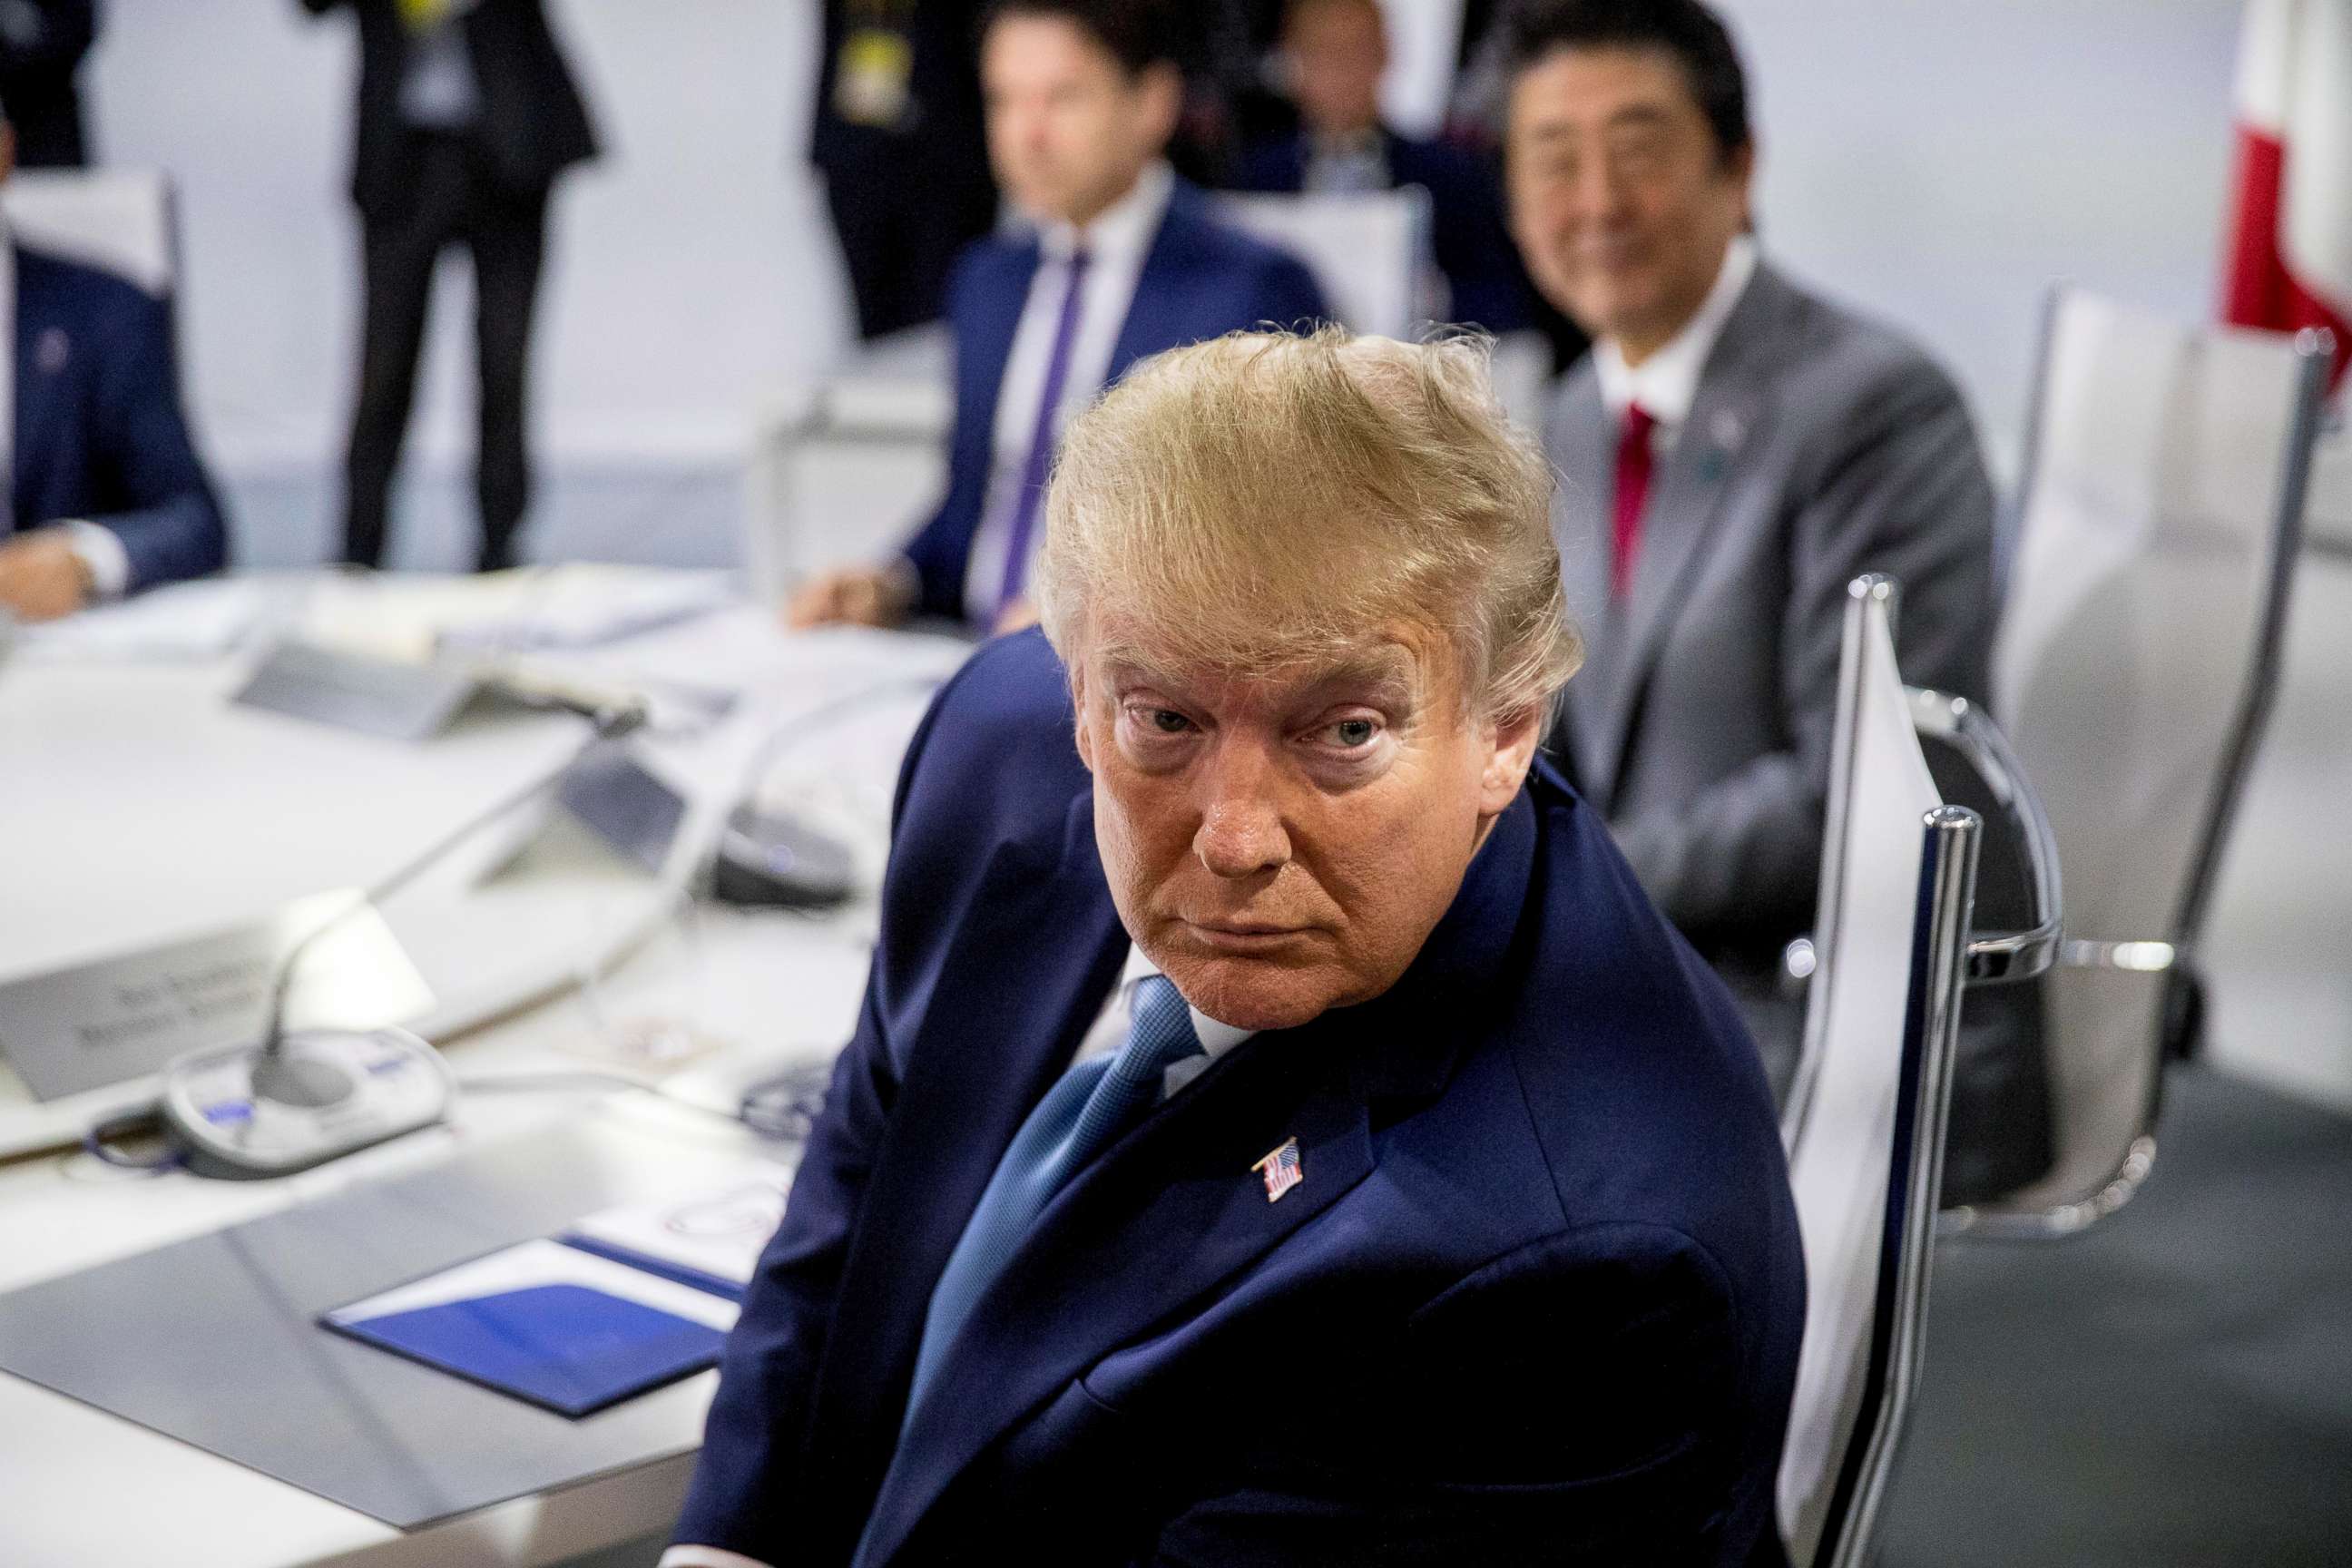 PHOTO: President Donald Trump participates in a Working Session on the Global Economy, Foreign Policy, and Security Affairs at the G-7 summit in Biarritz, France, on Sunday, Aug. 25, 2019. 